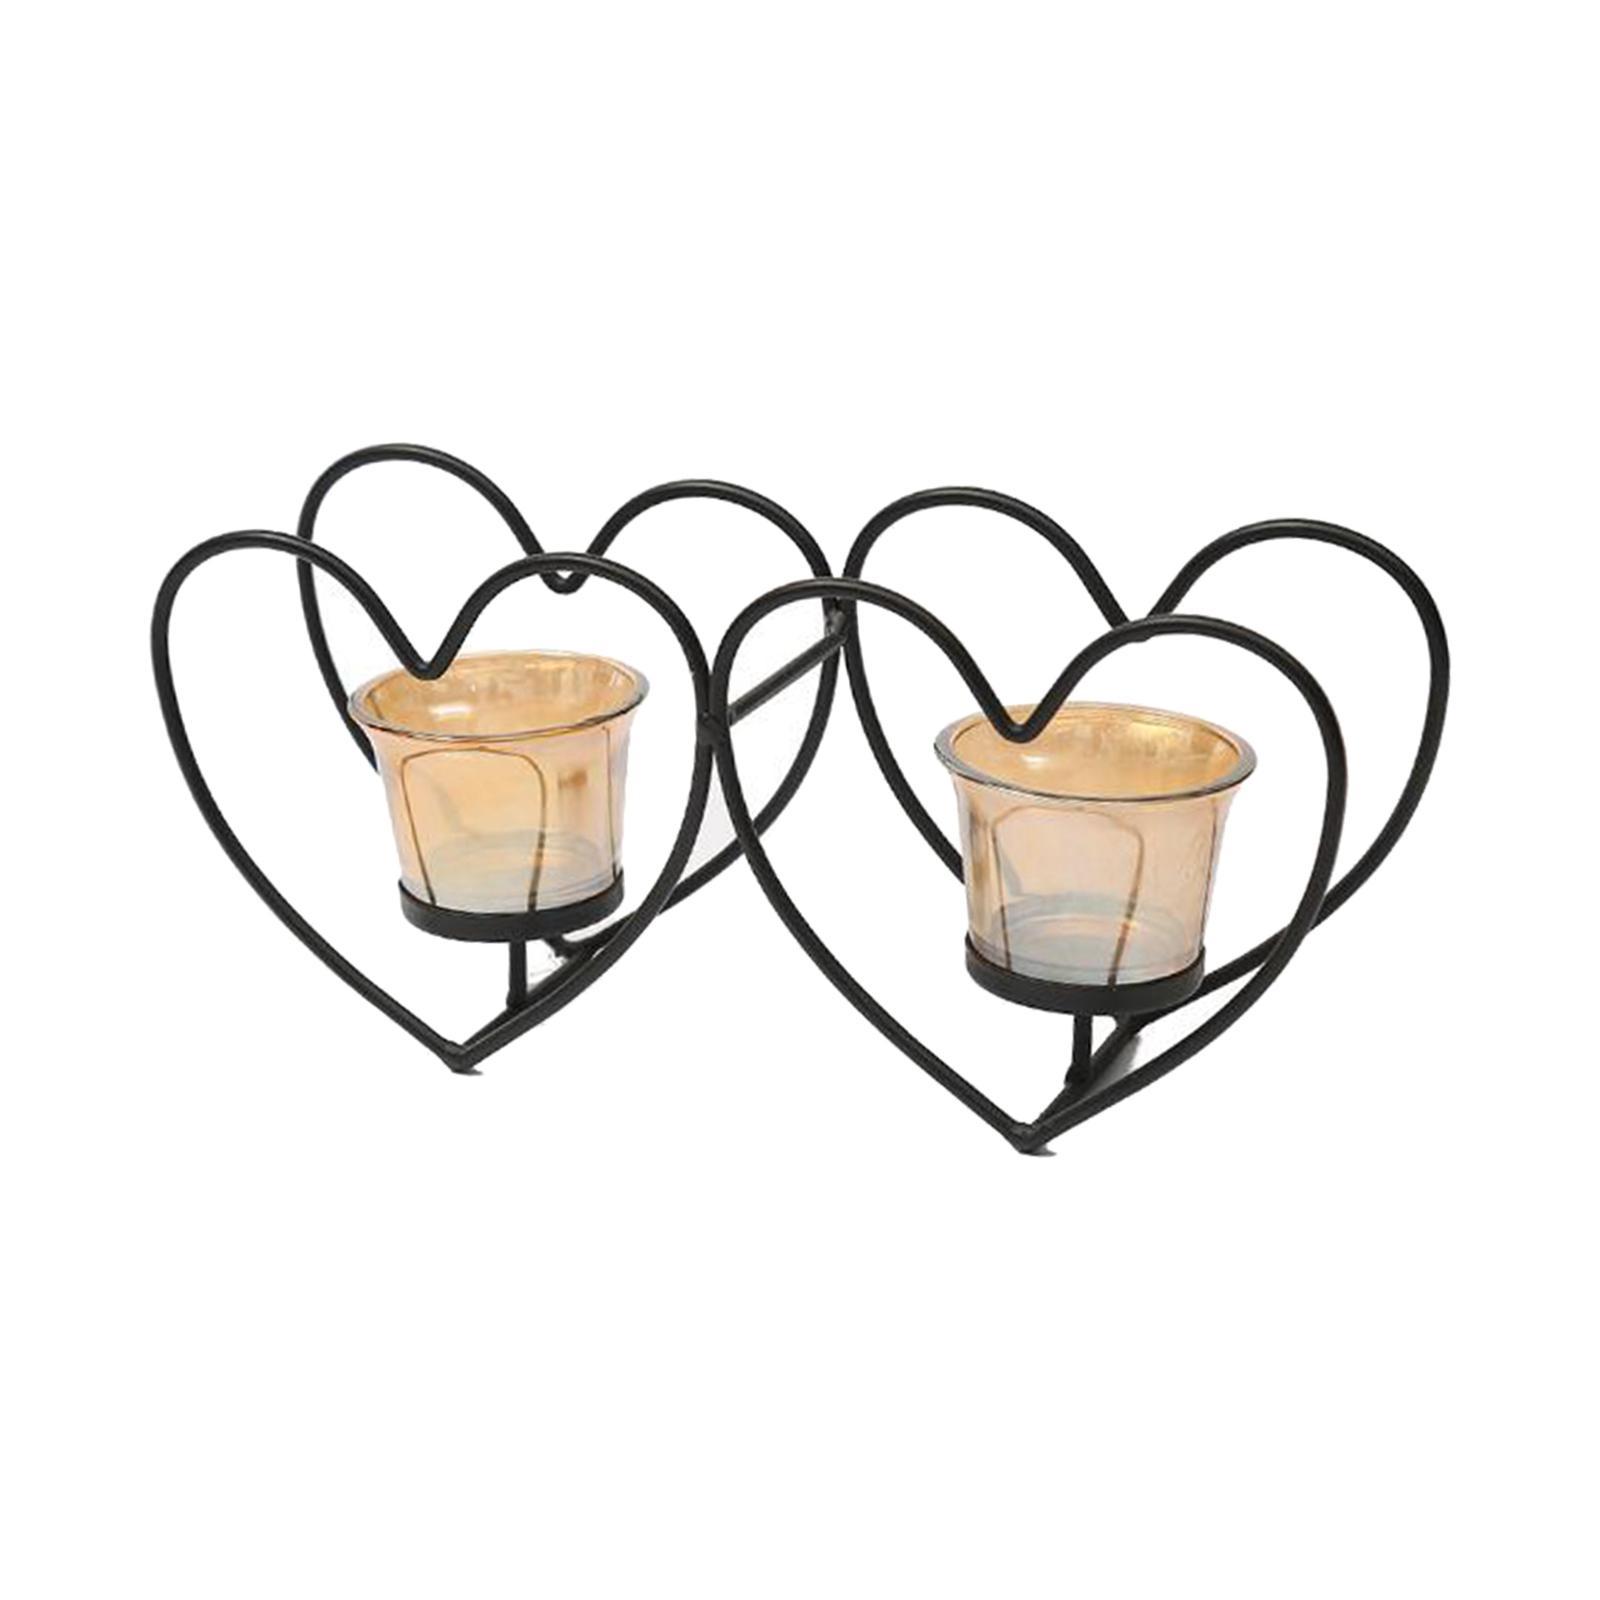 Nordic Heart Candle Holder Tealight Candlestick Decorative Candle Stand Wedding Holiday Table Centerpiece Decor Birthday Gift